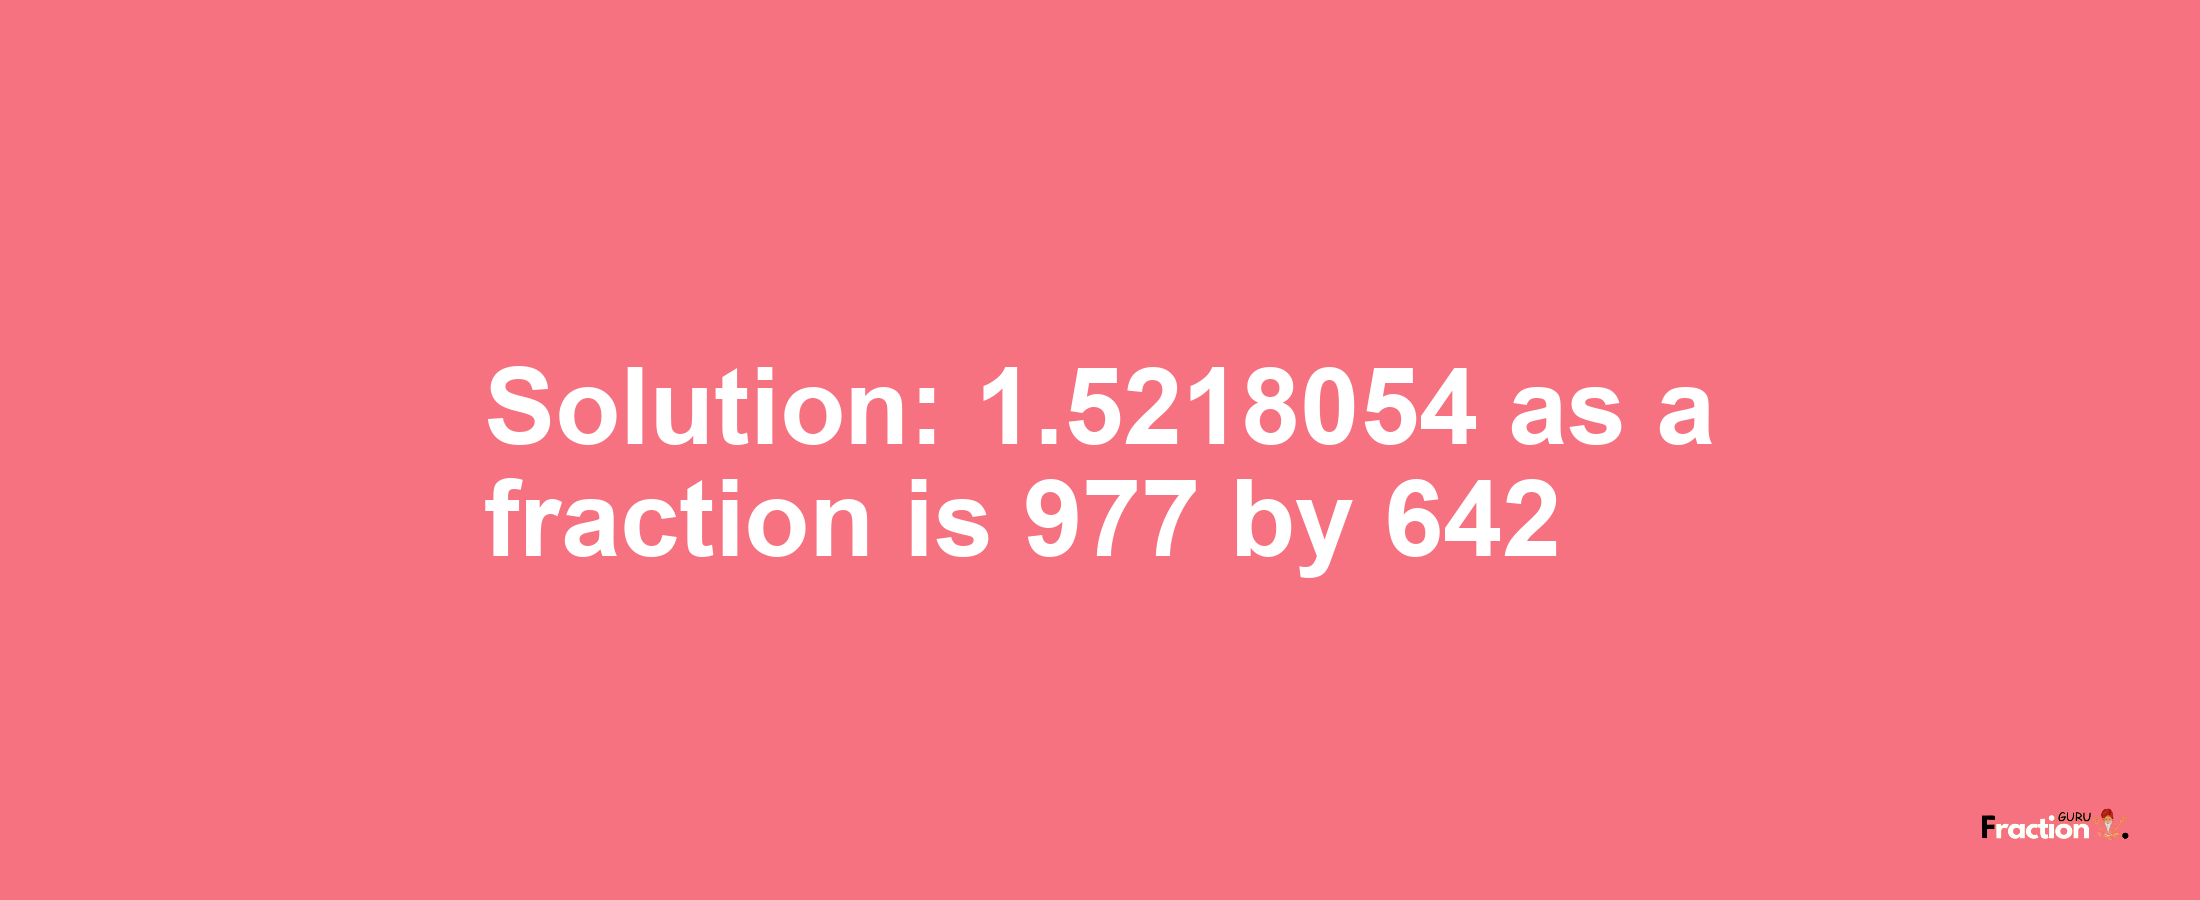 Solution:1.5218054 as a fraction is 977/642